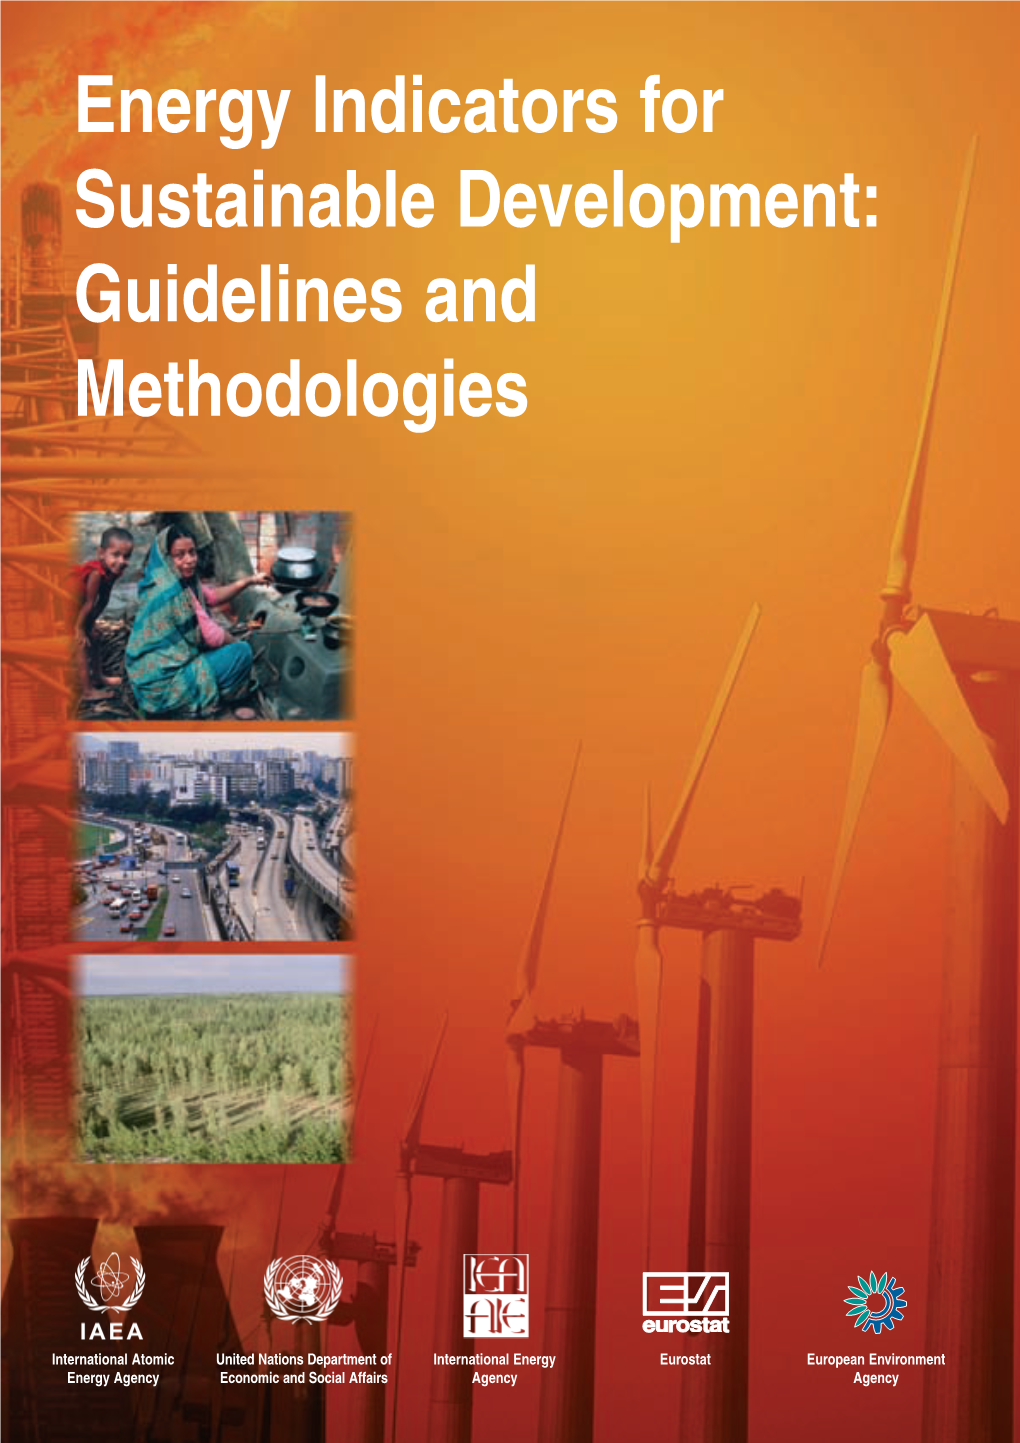 Energy Indicators for Sustainable Development: Guidelines and Methodologies